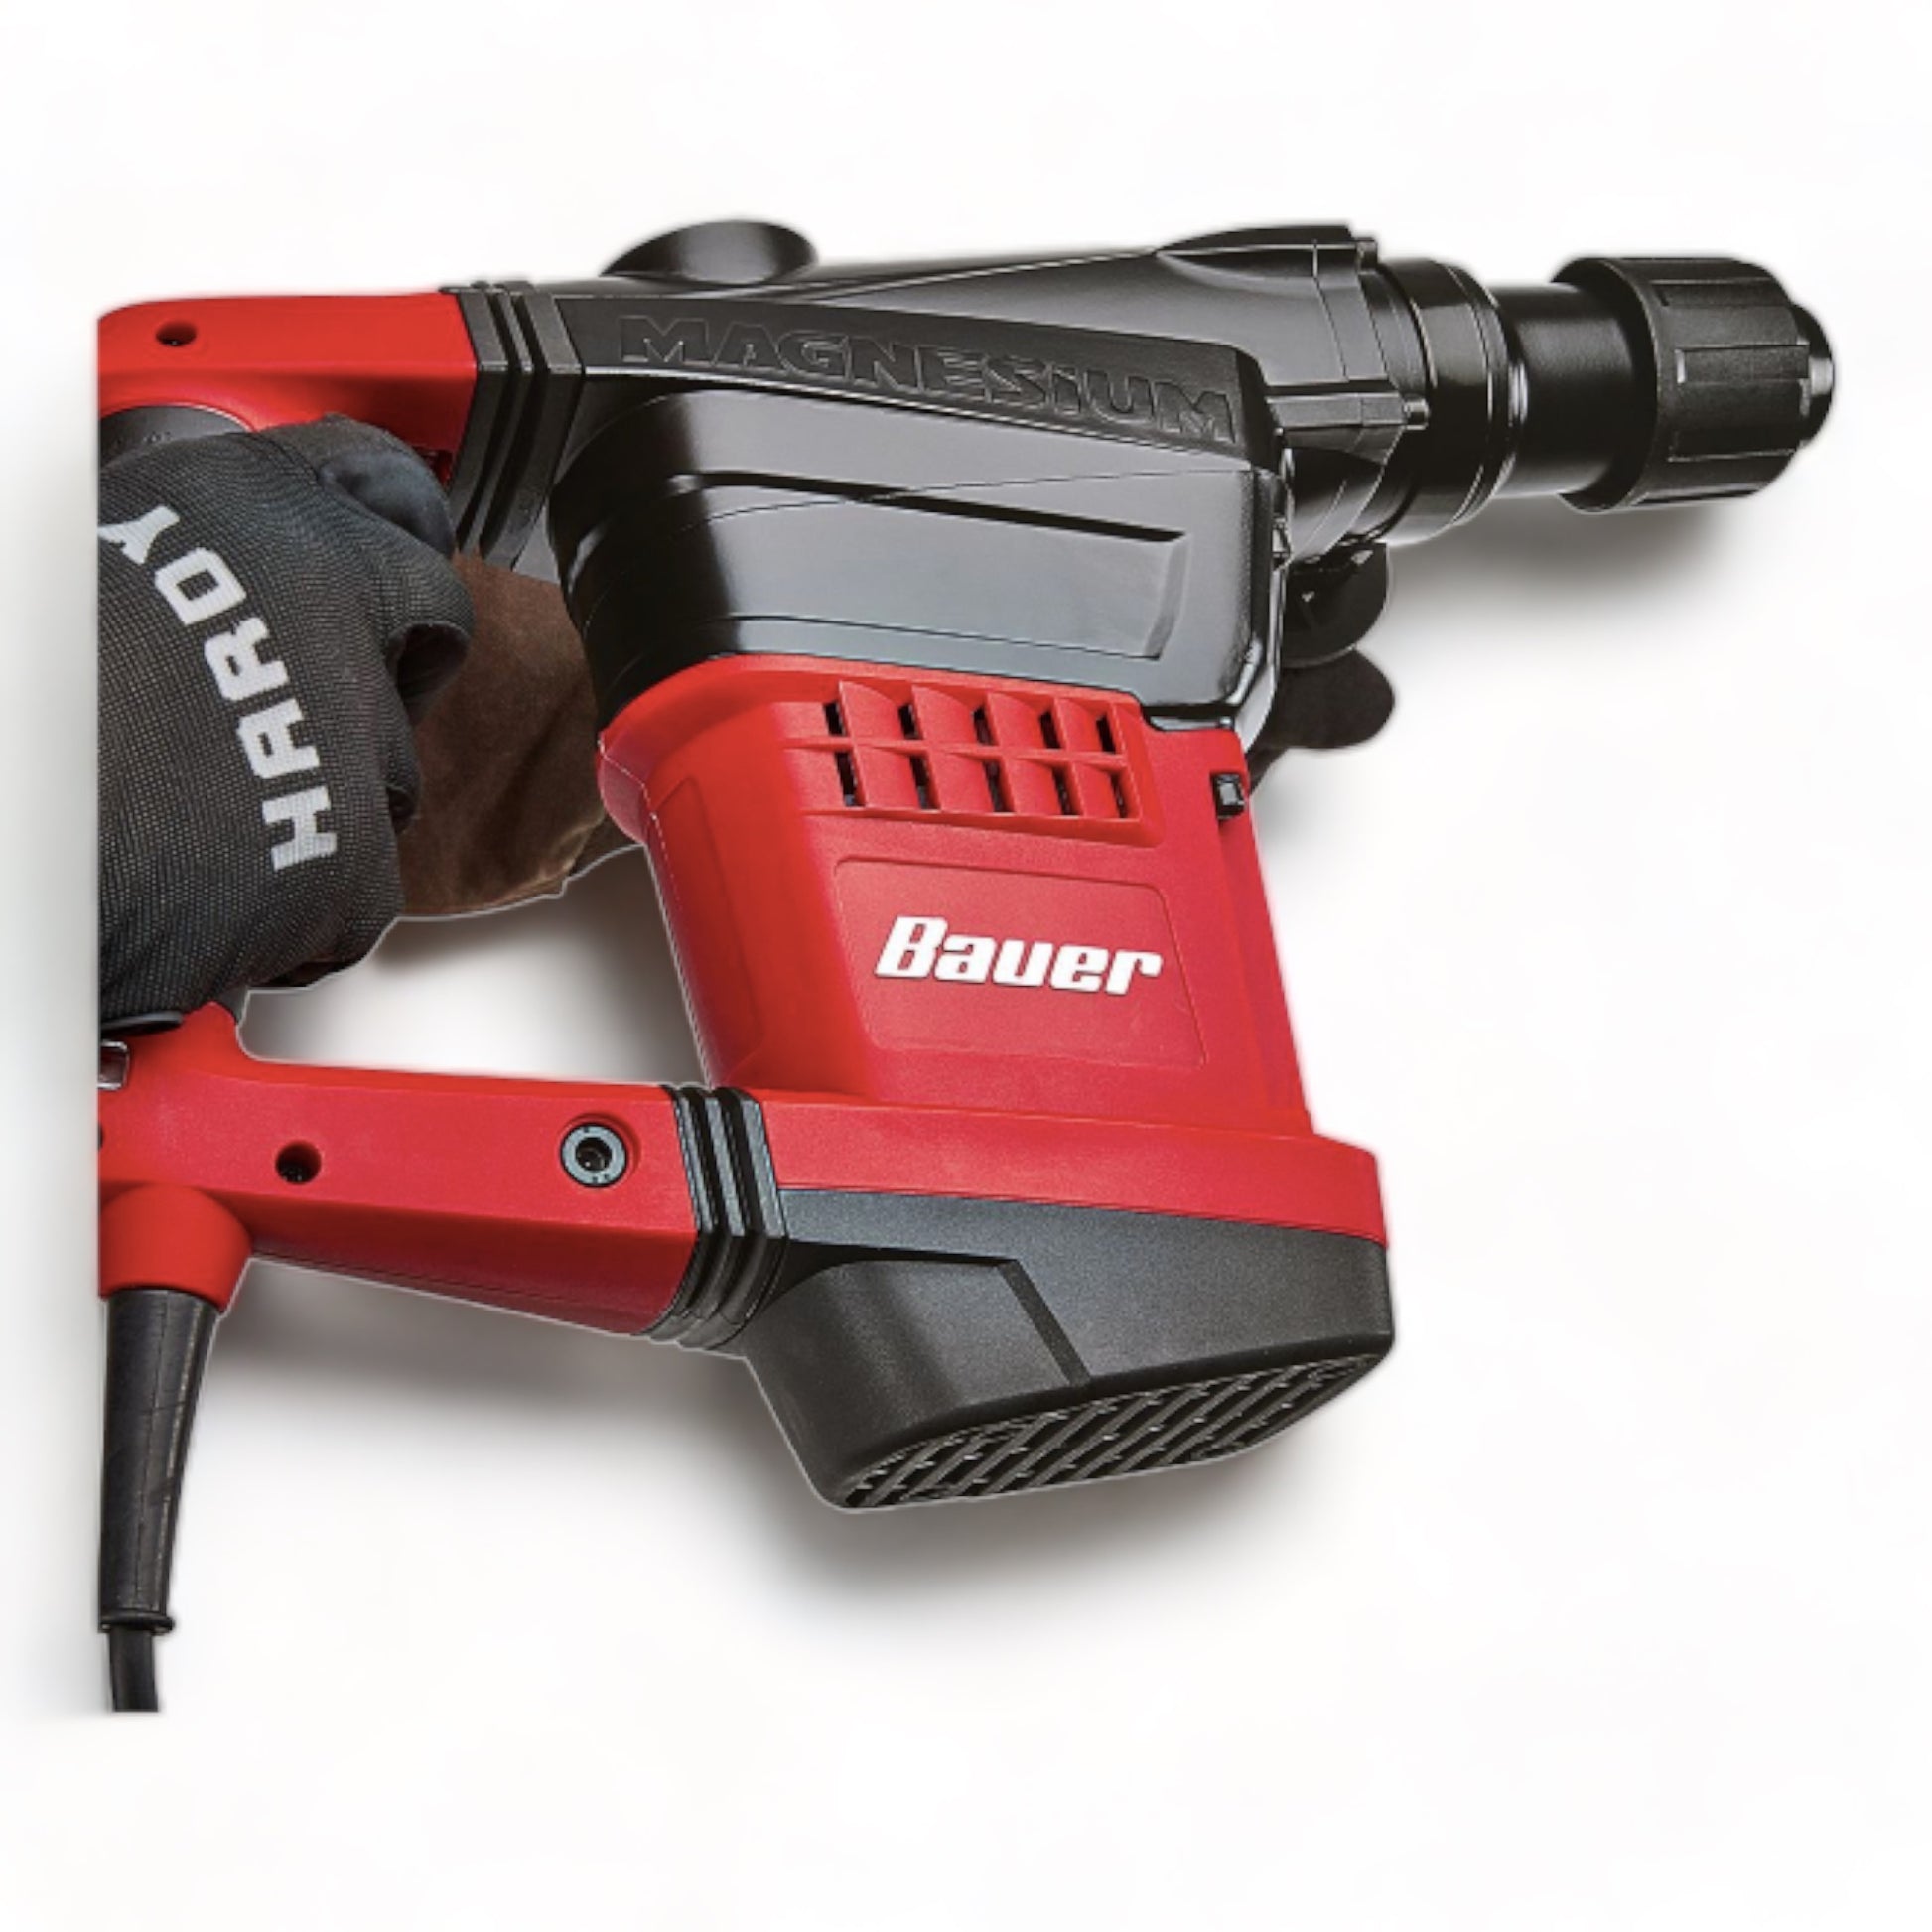 11RT 11 Amp 1-9/16 In. SDS Max-Type Pro Variable Speed Rotary Hammer